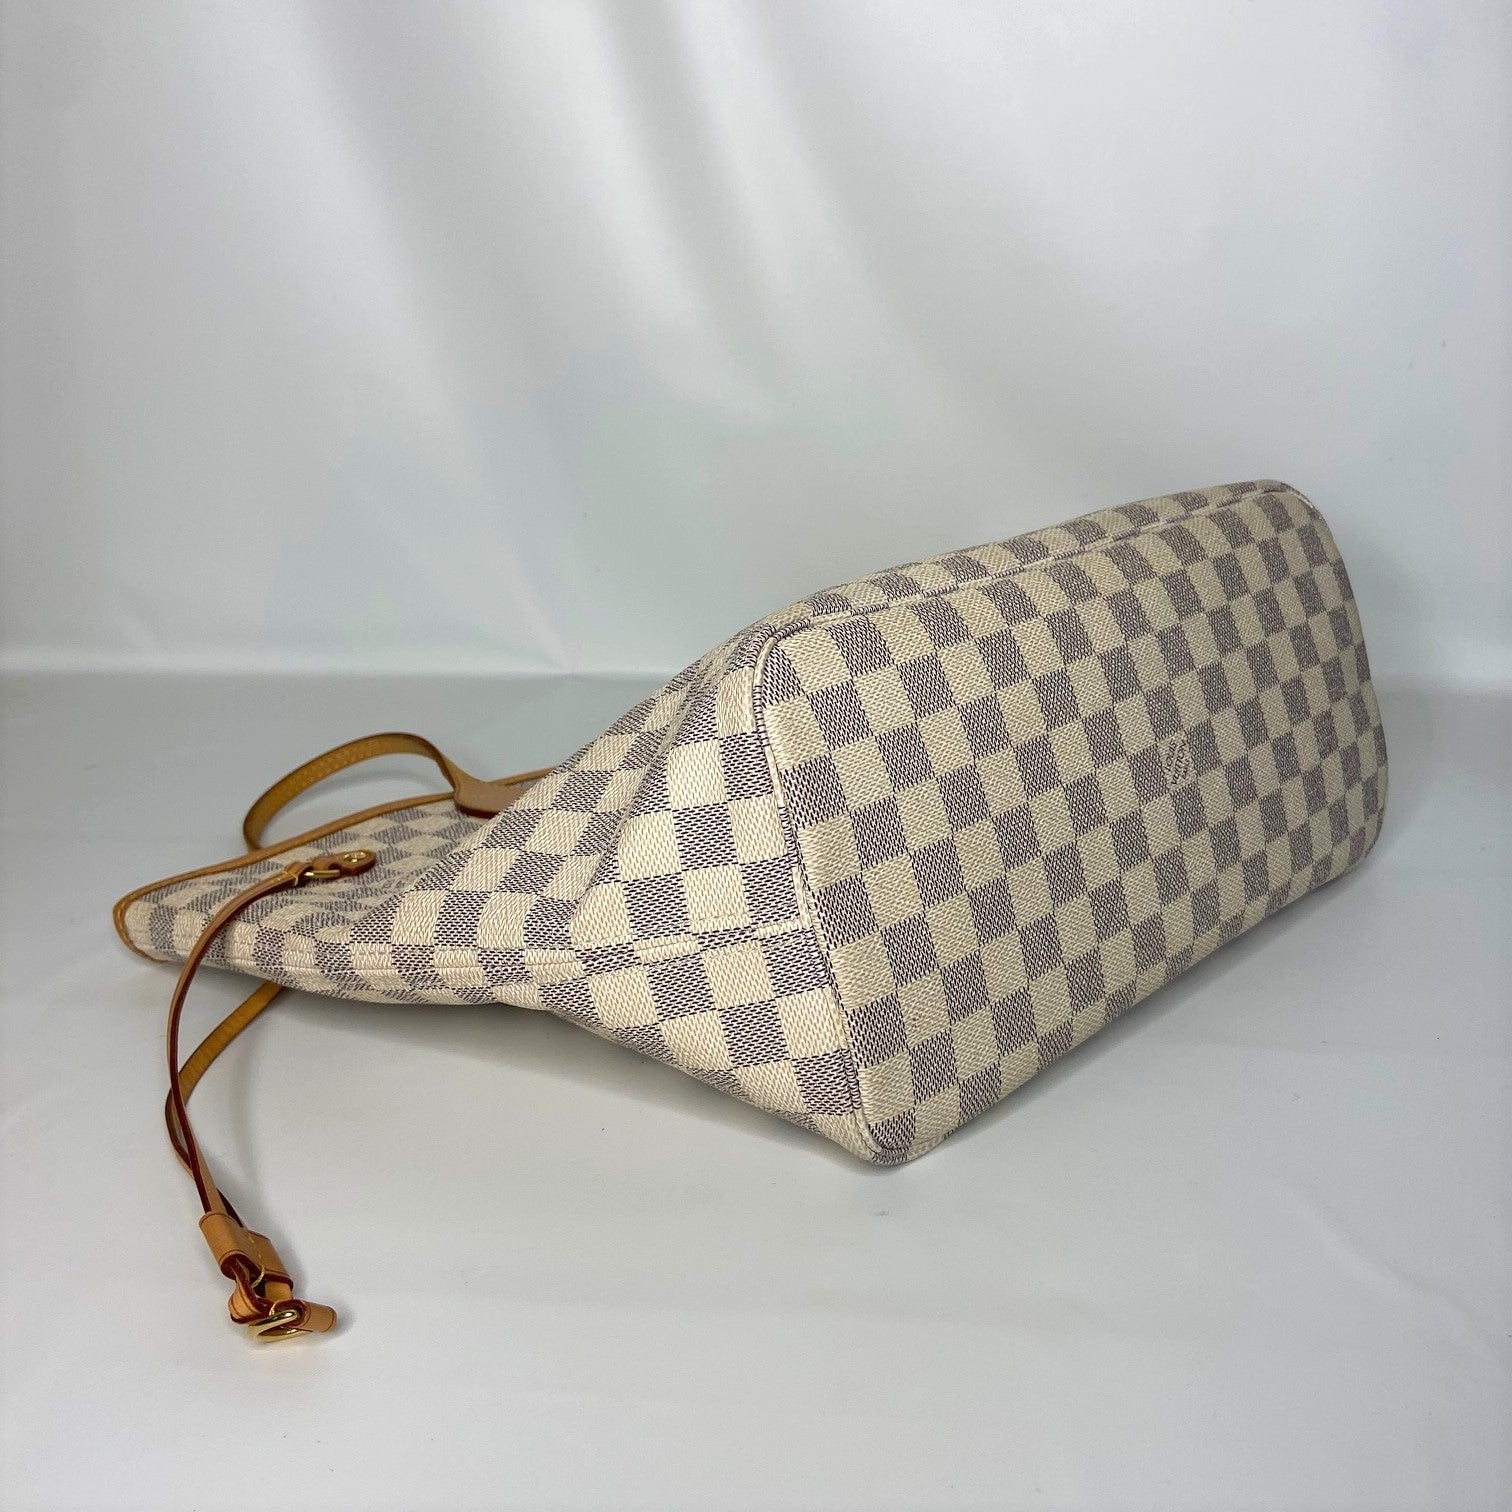 How to Spot Authentic LOUIS VUITTON NEVERFULL MM BAG & Where to